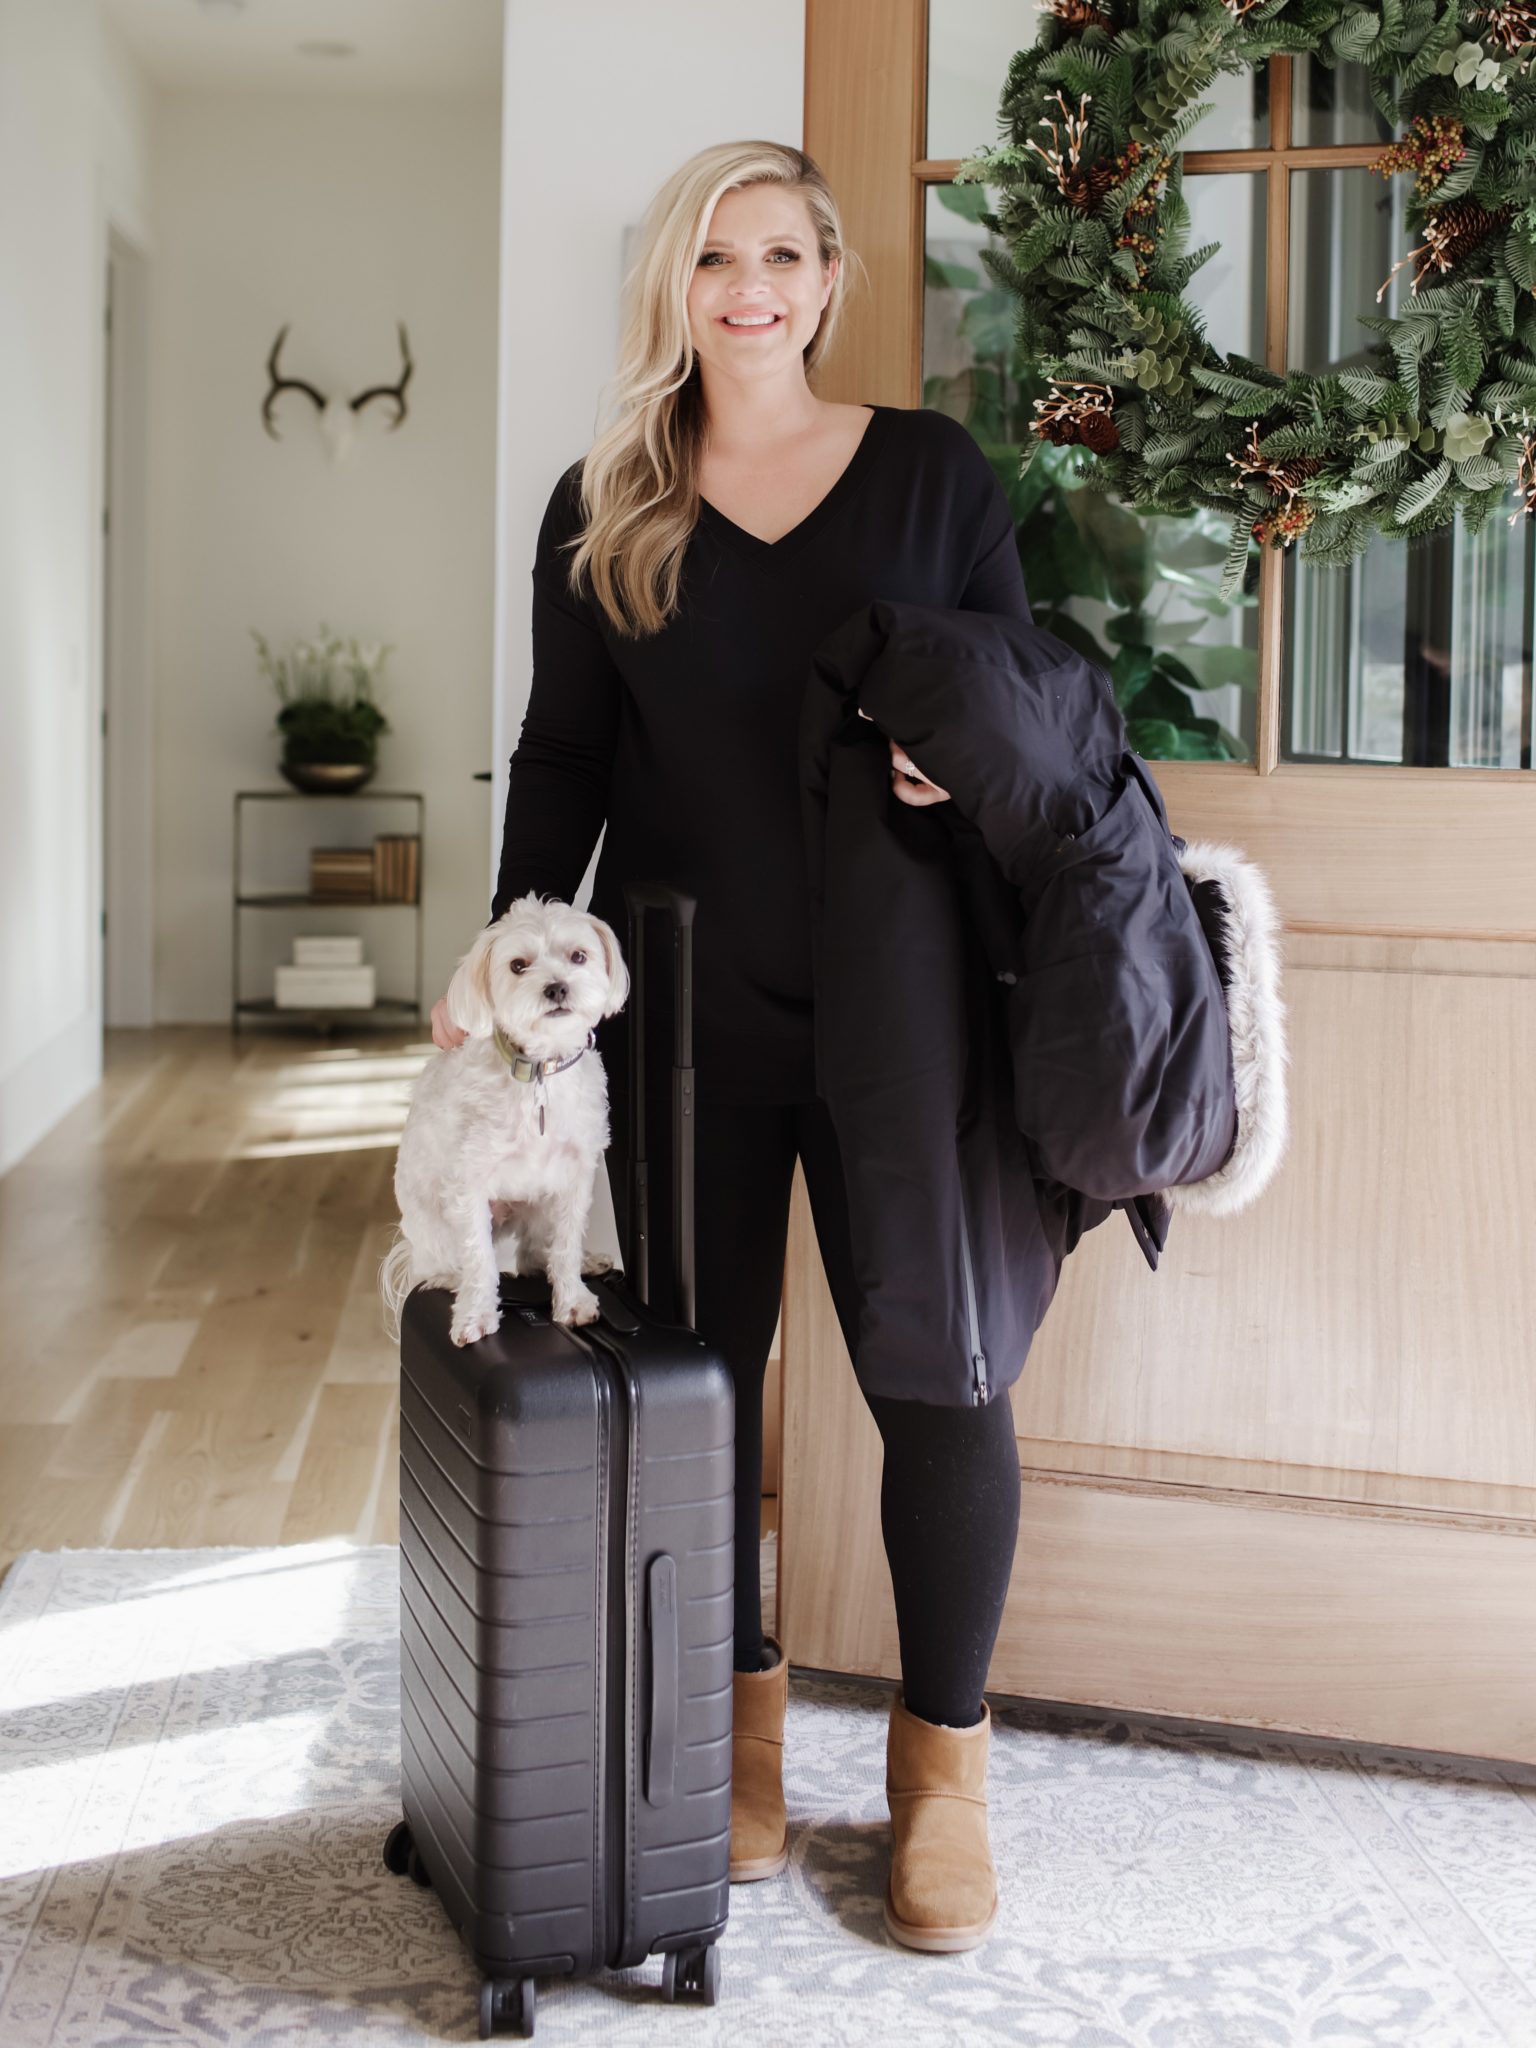 Travel Day Style from AthletaÂ - Cristin Cooper